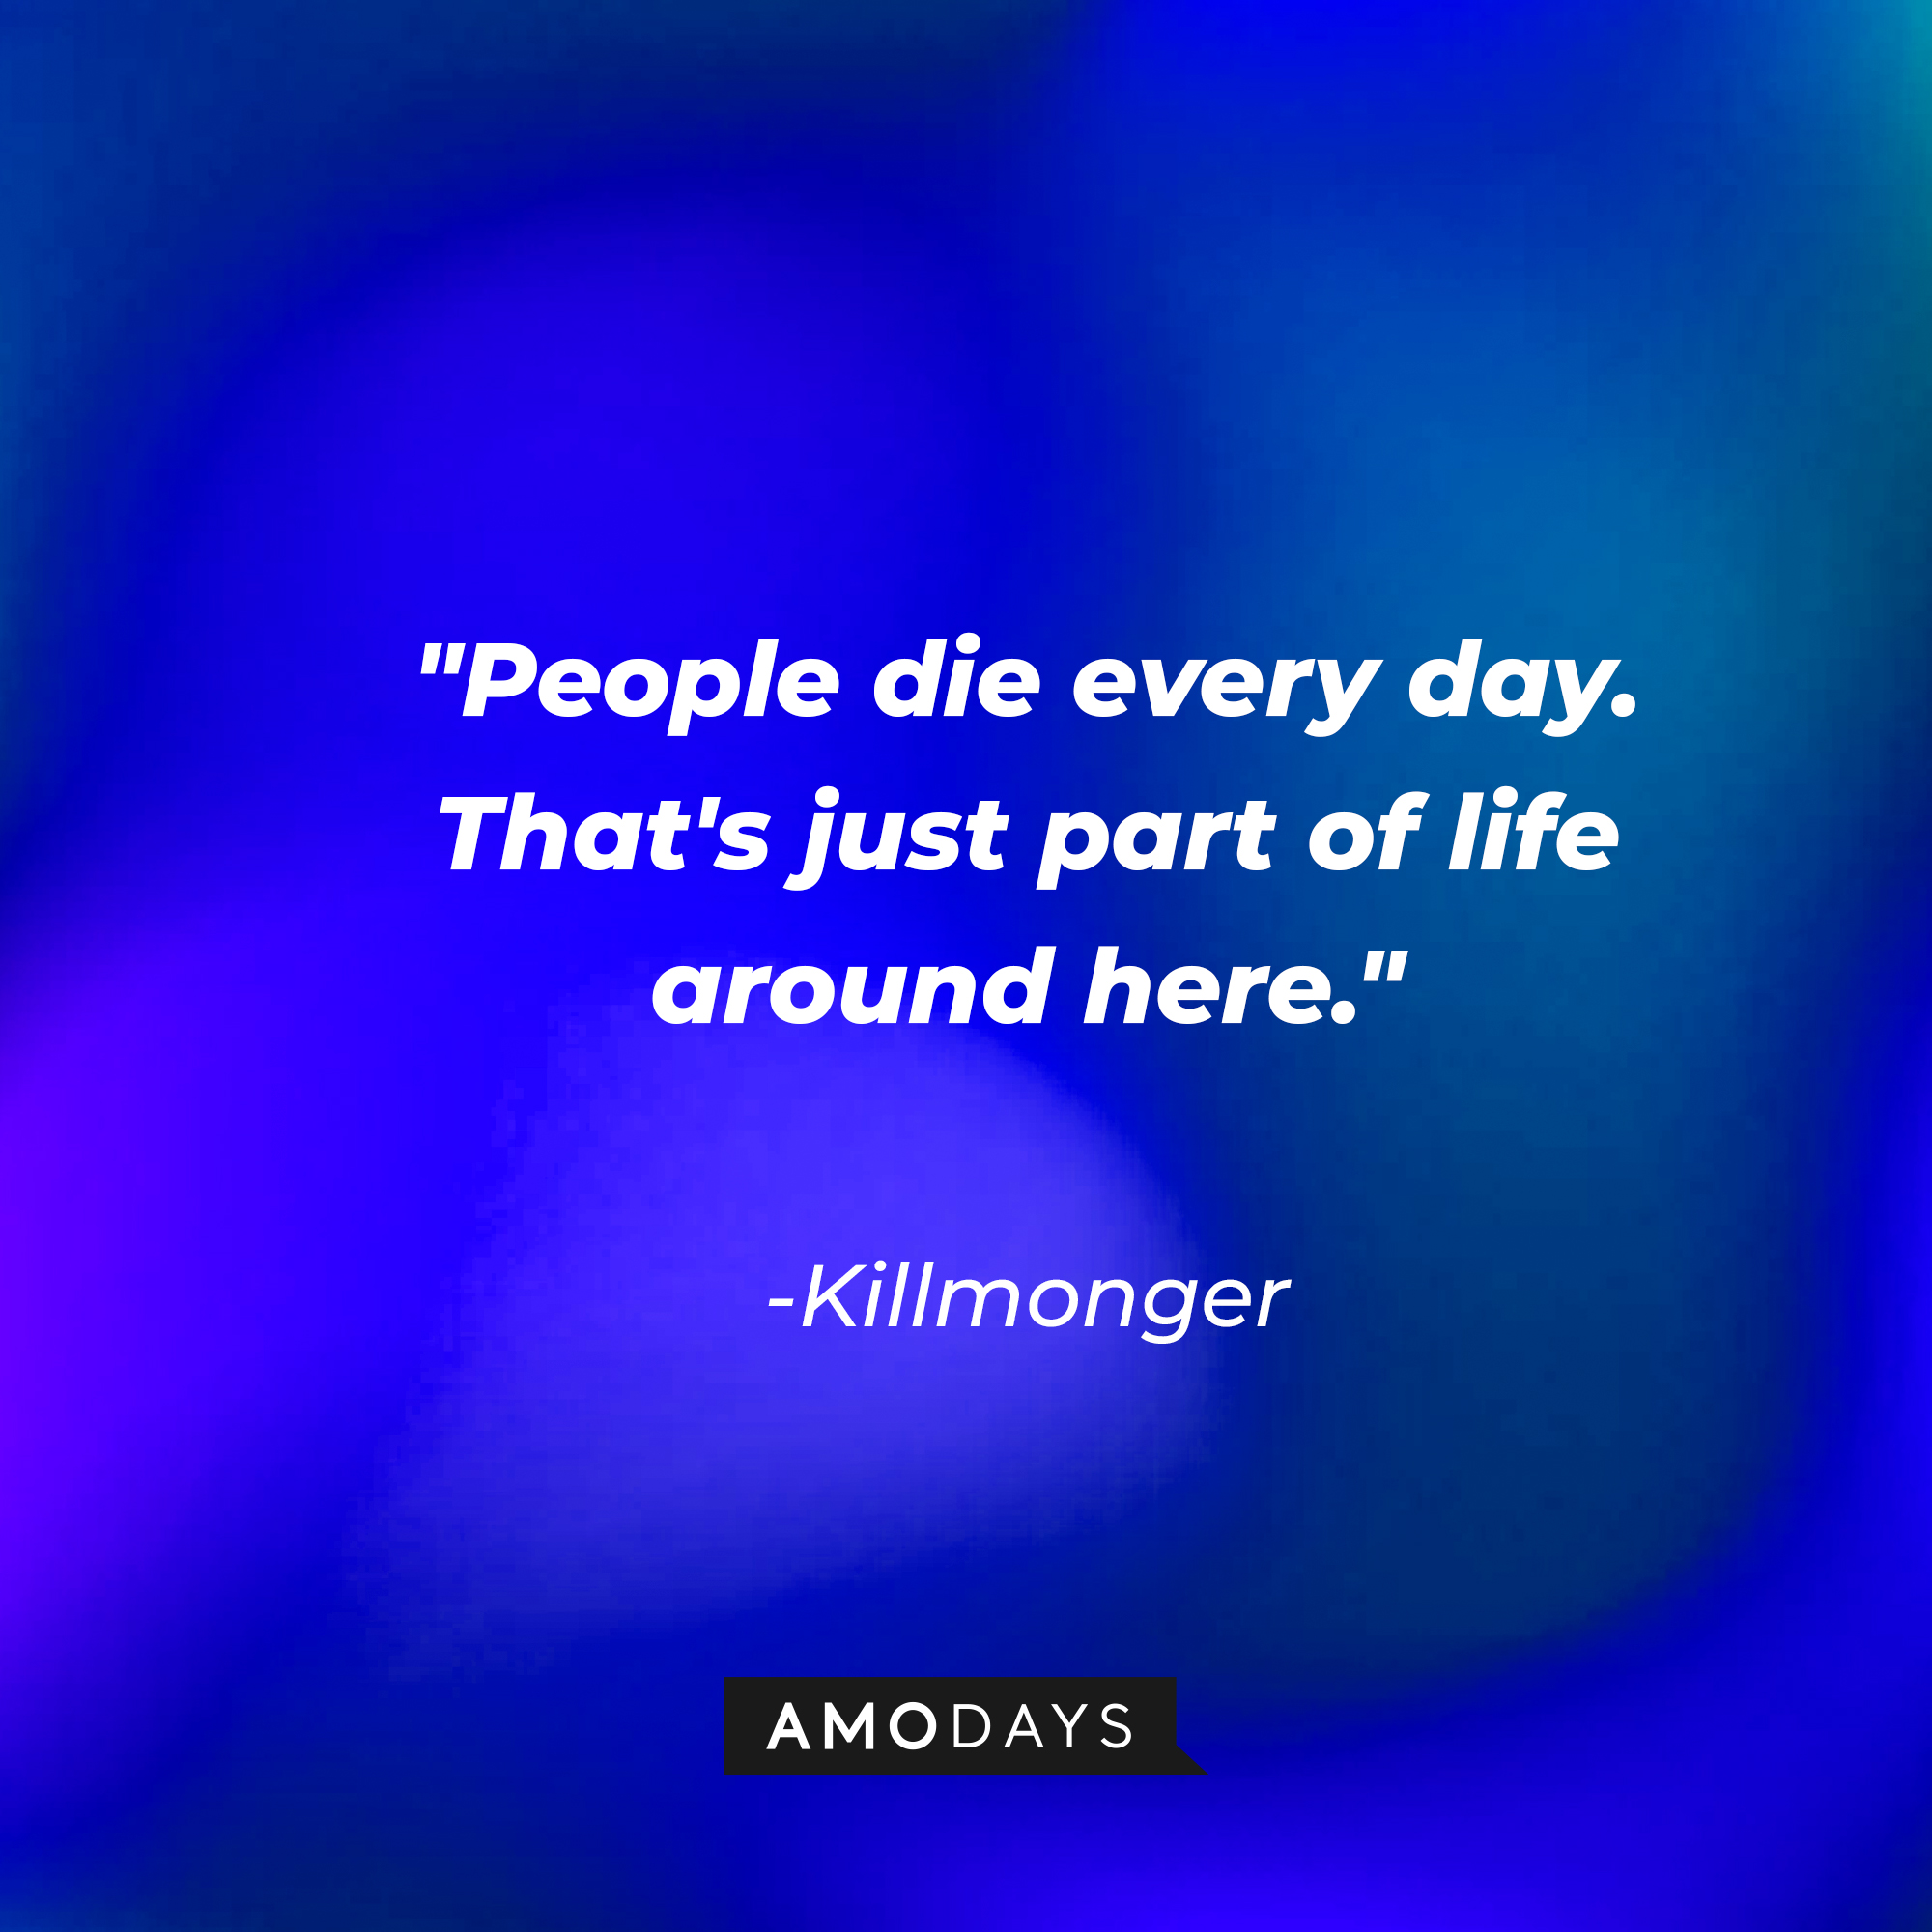 Killmonger's quote: "People die every day. That's just part of life around here." | Source: AmoDays